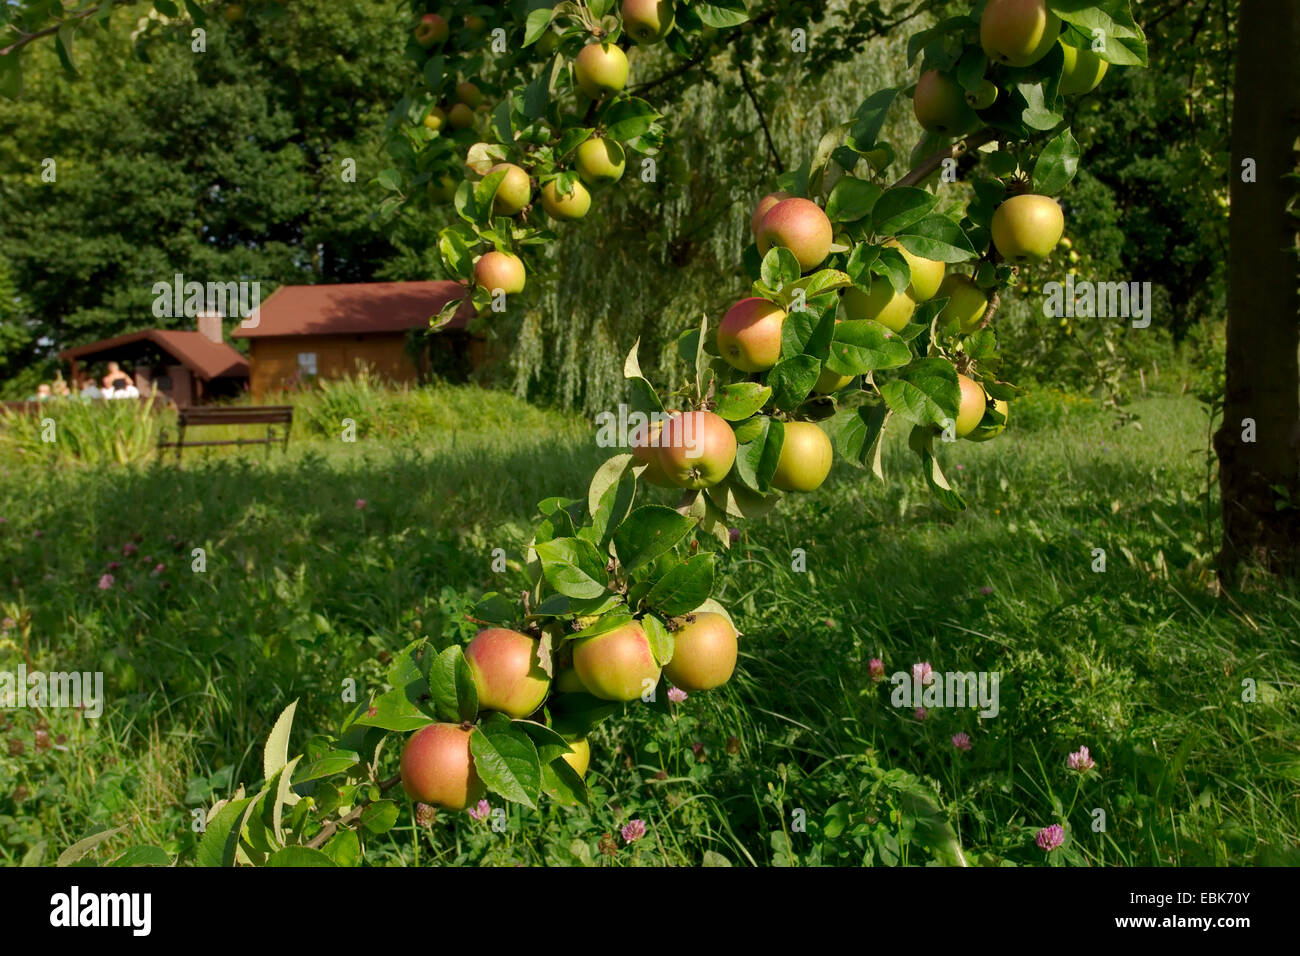 apple tree (Malus domestica), appels at the tree, Germany Stock Photo